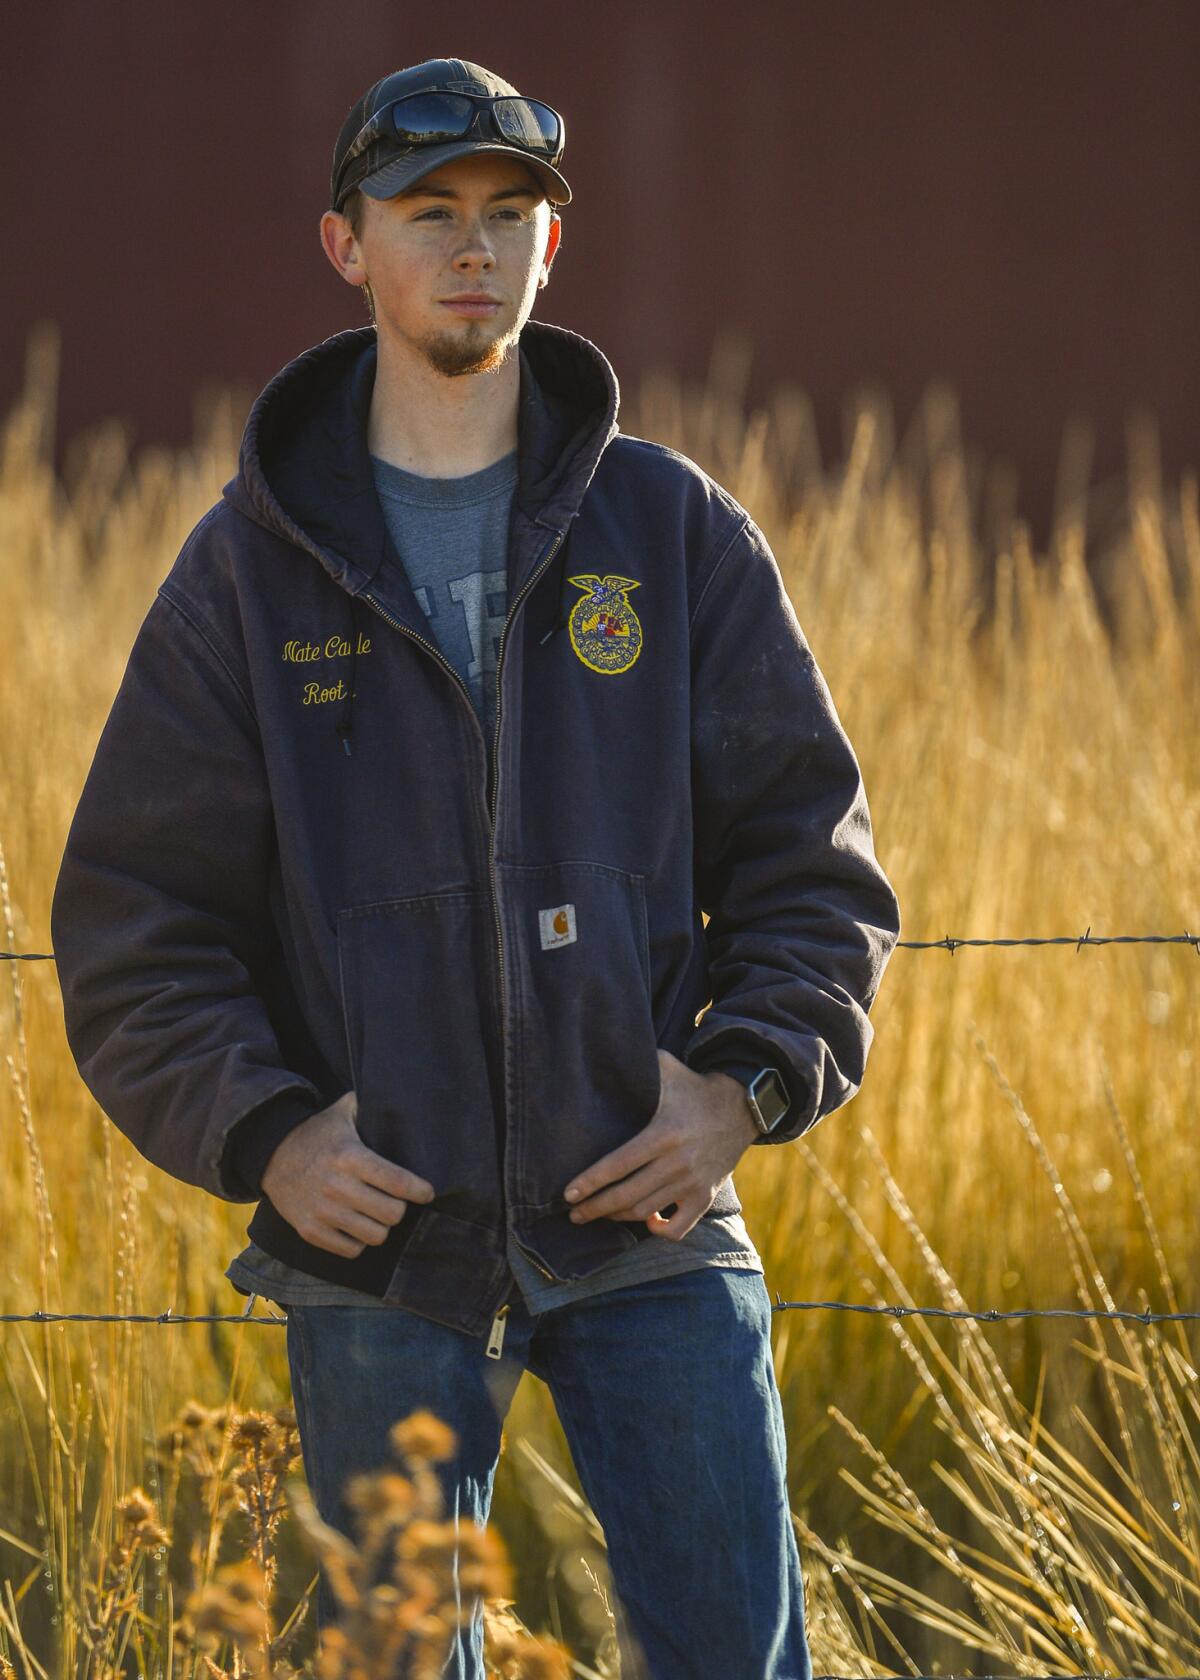 Nate Cable, a senior at Roots Charter High School, spent many evenings keeping watch over animals at the farm when the killer dog, which he encountered once, was a menace.